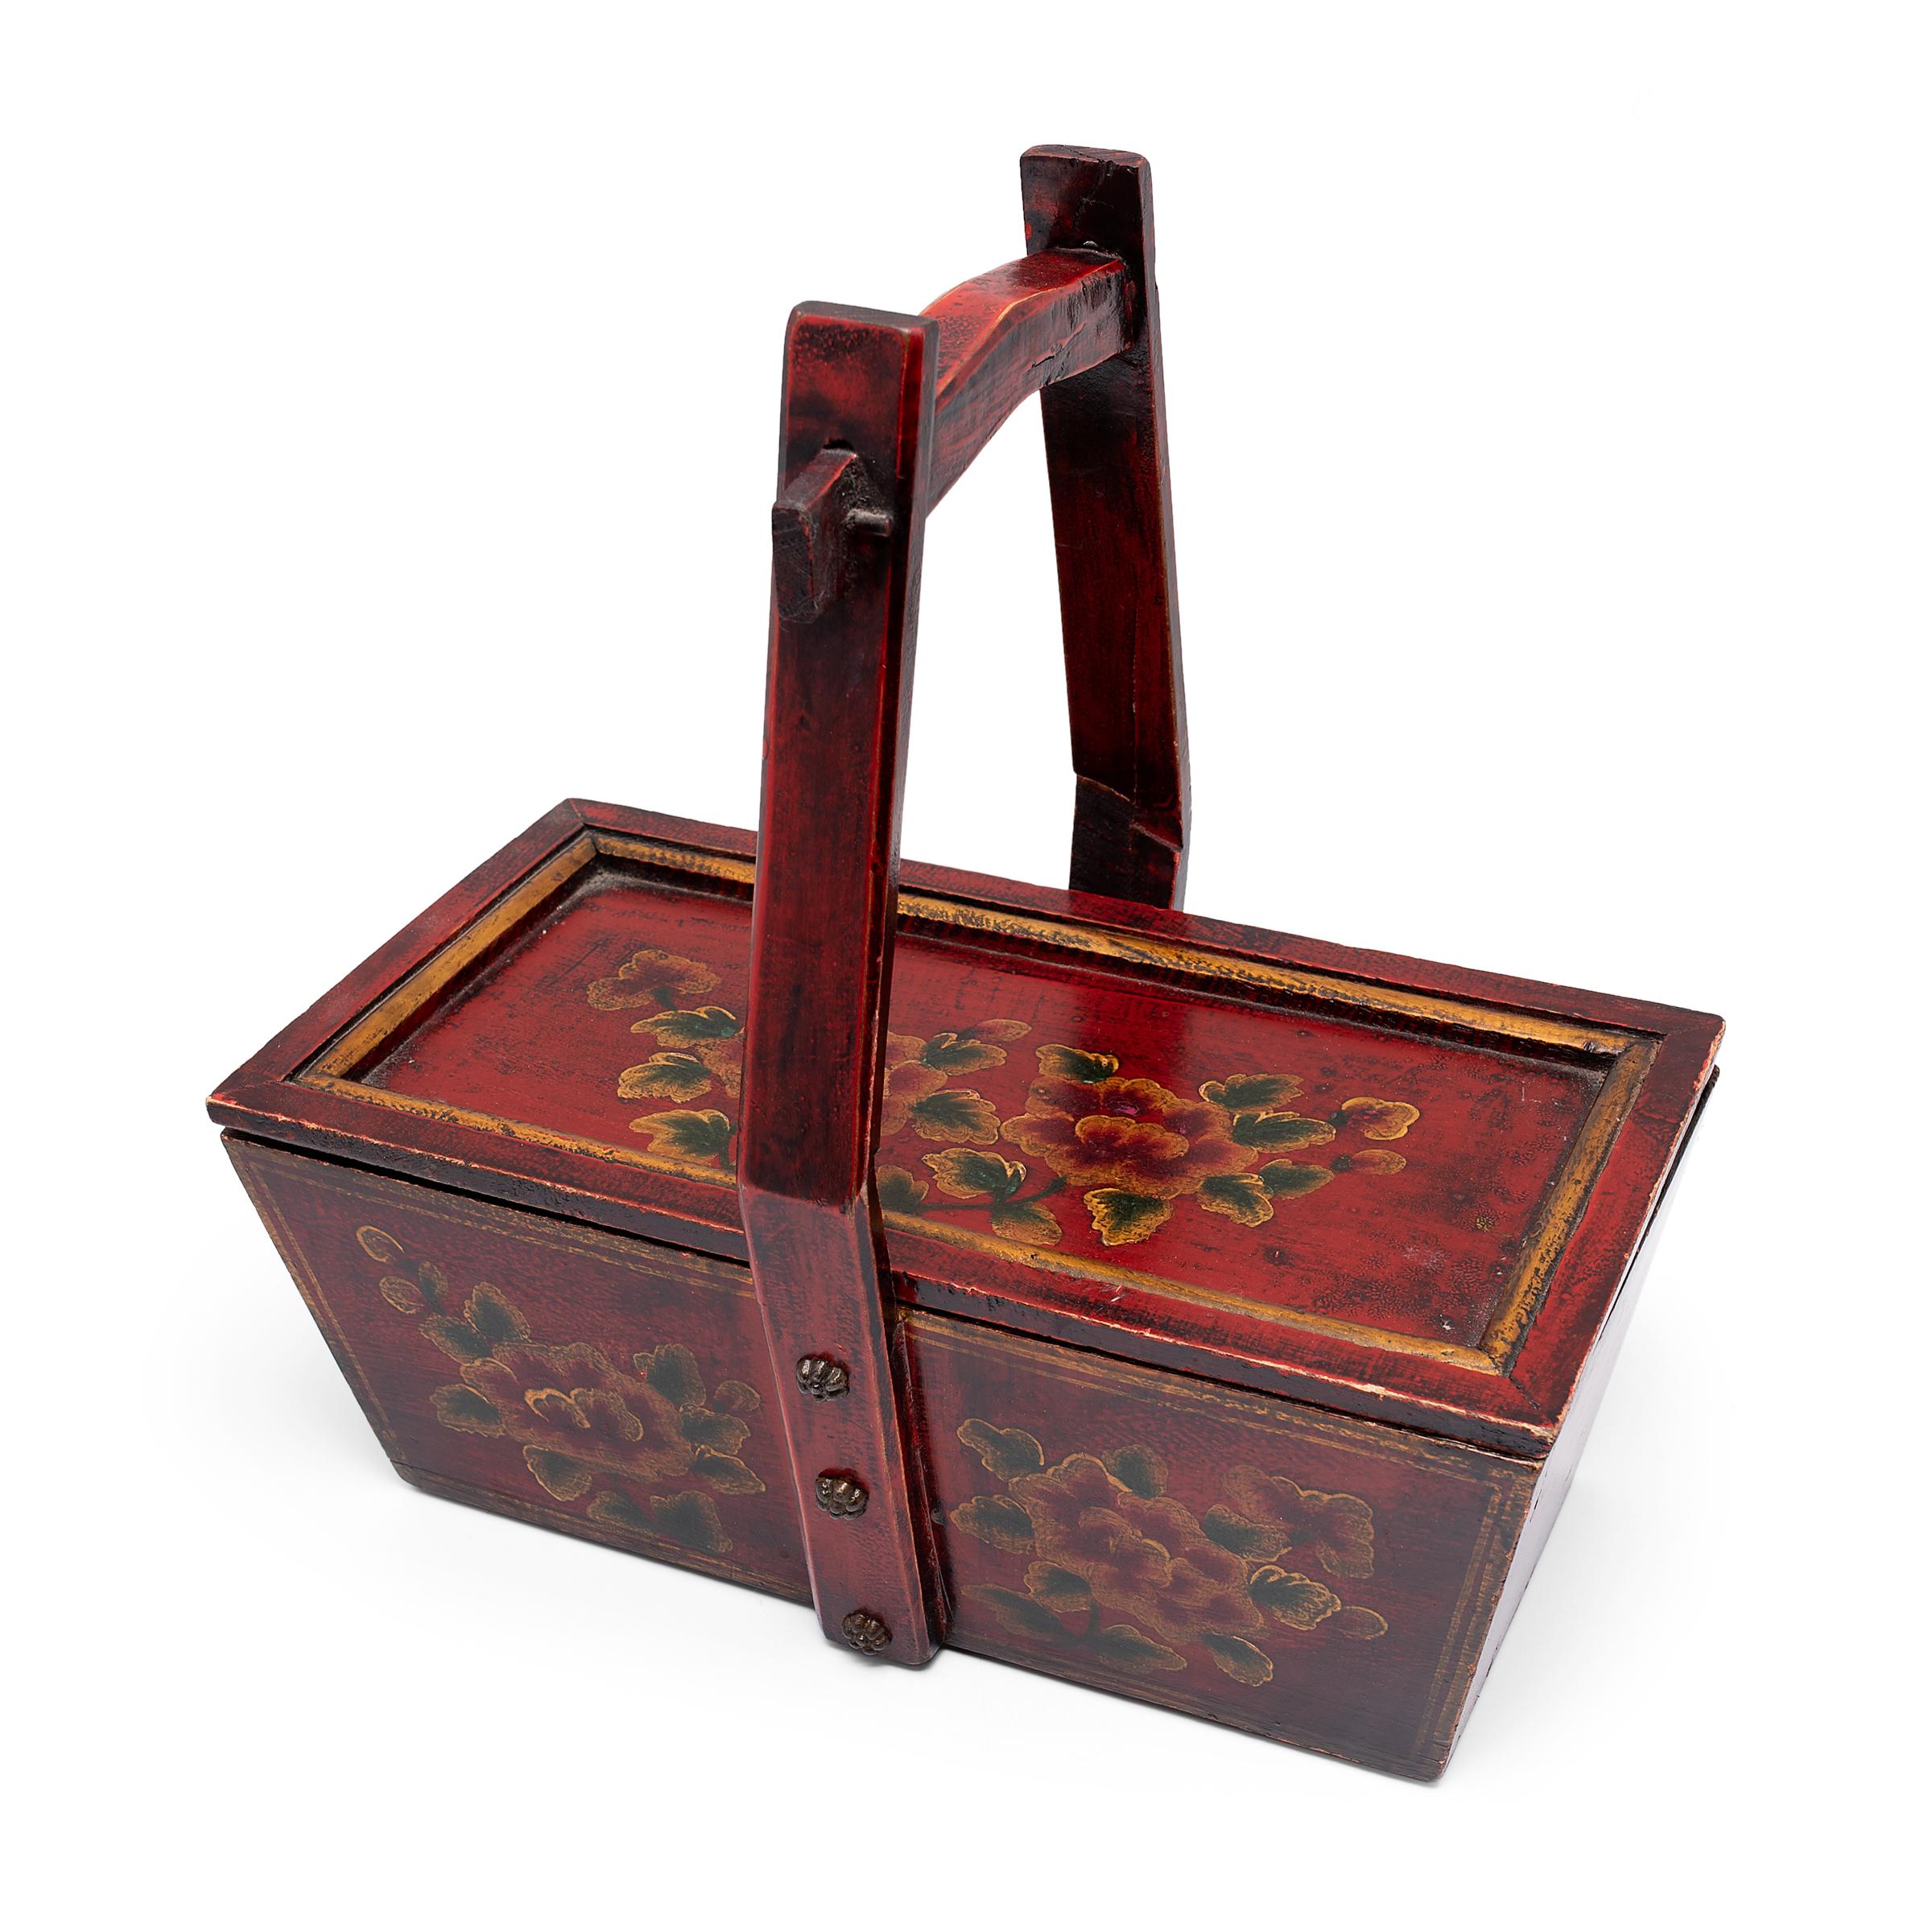 This painted carrying box is a mid-century example of the traditional containers used for transporting food, water, and other goods from place to place. The tall handle allowed the container to be placed on a carrying pole balanced across the